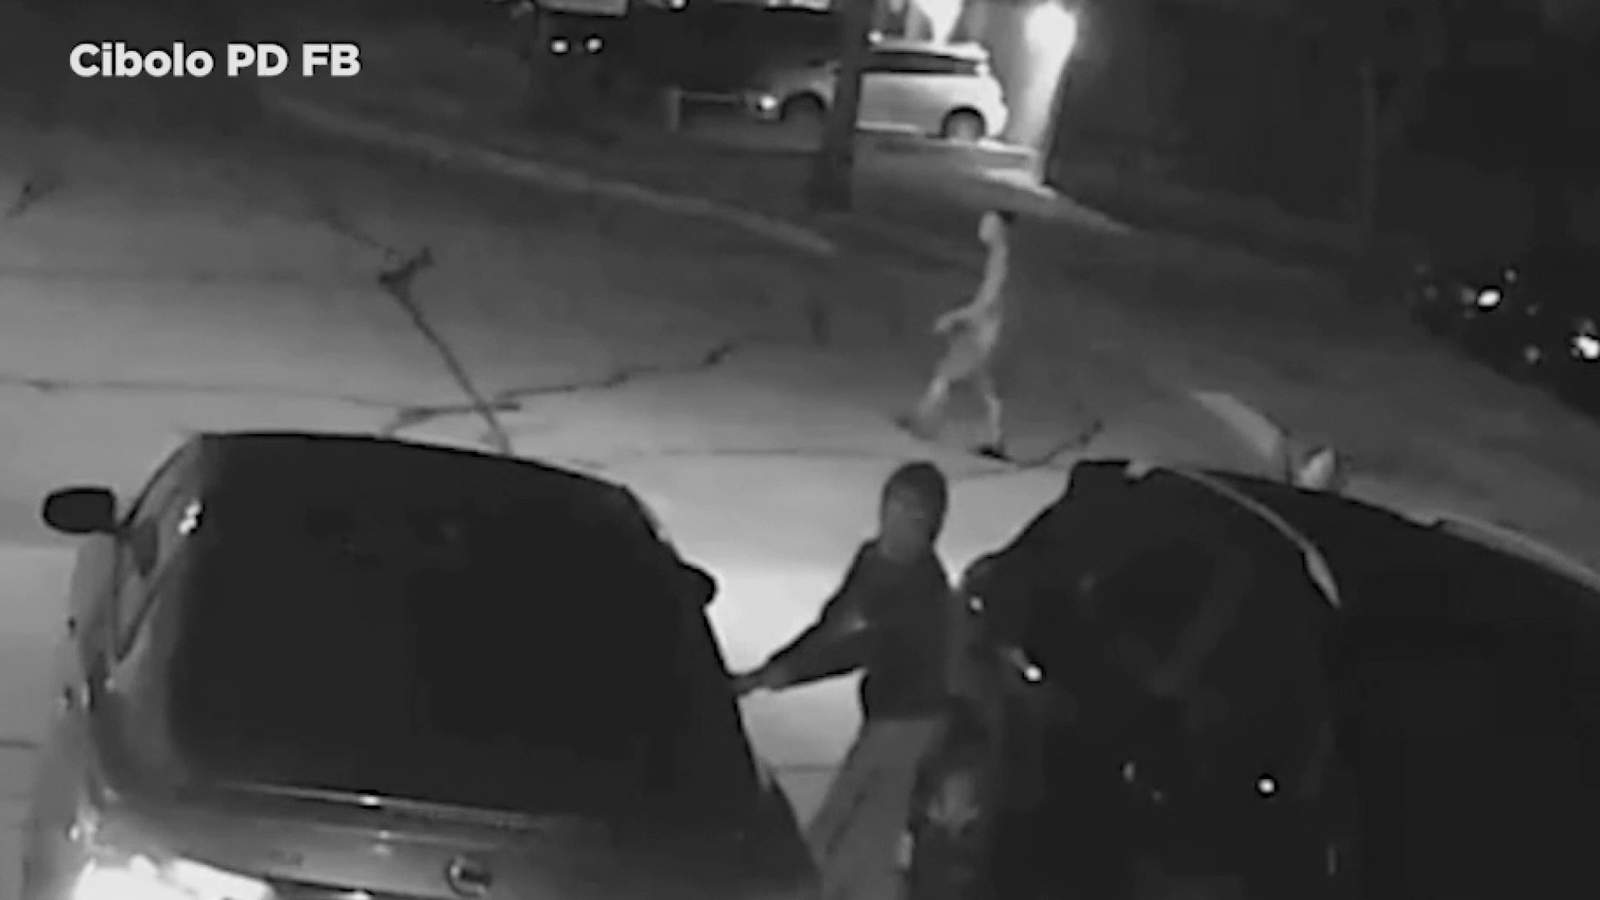 Cibolo police asking public for help in identifying car burglary suspects